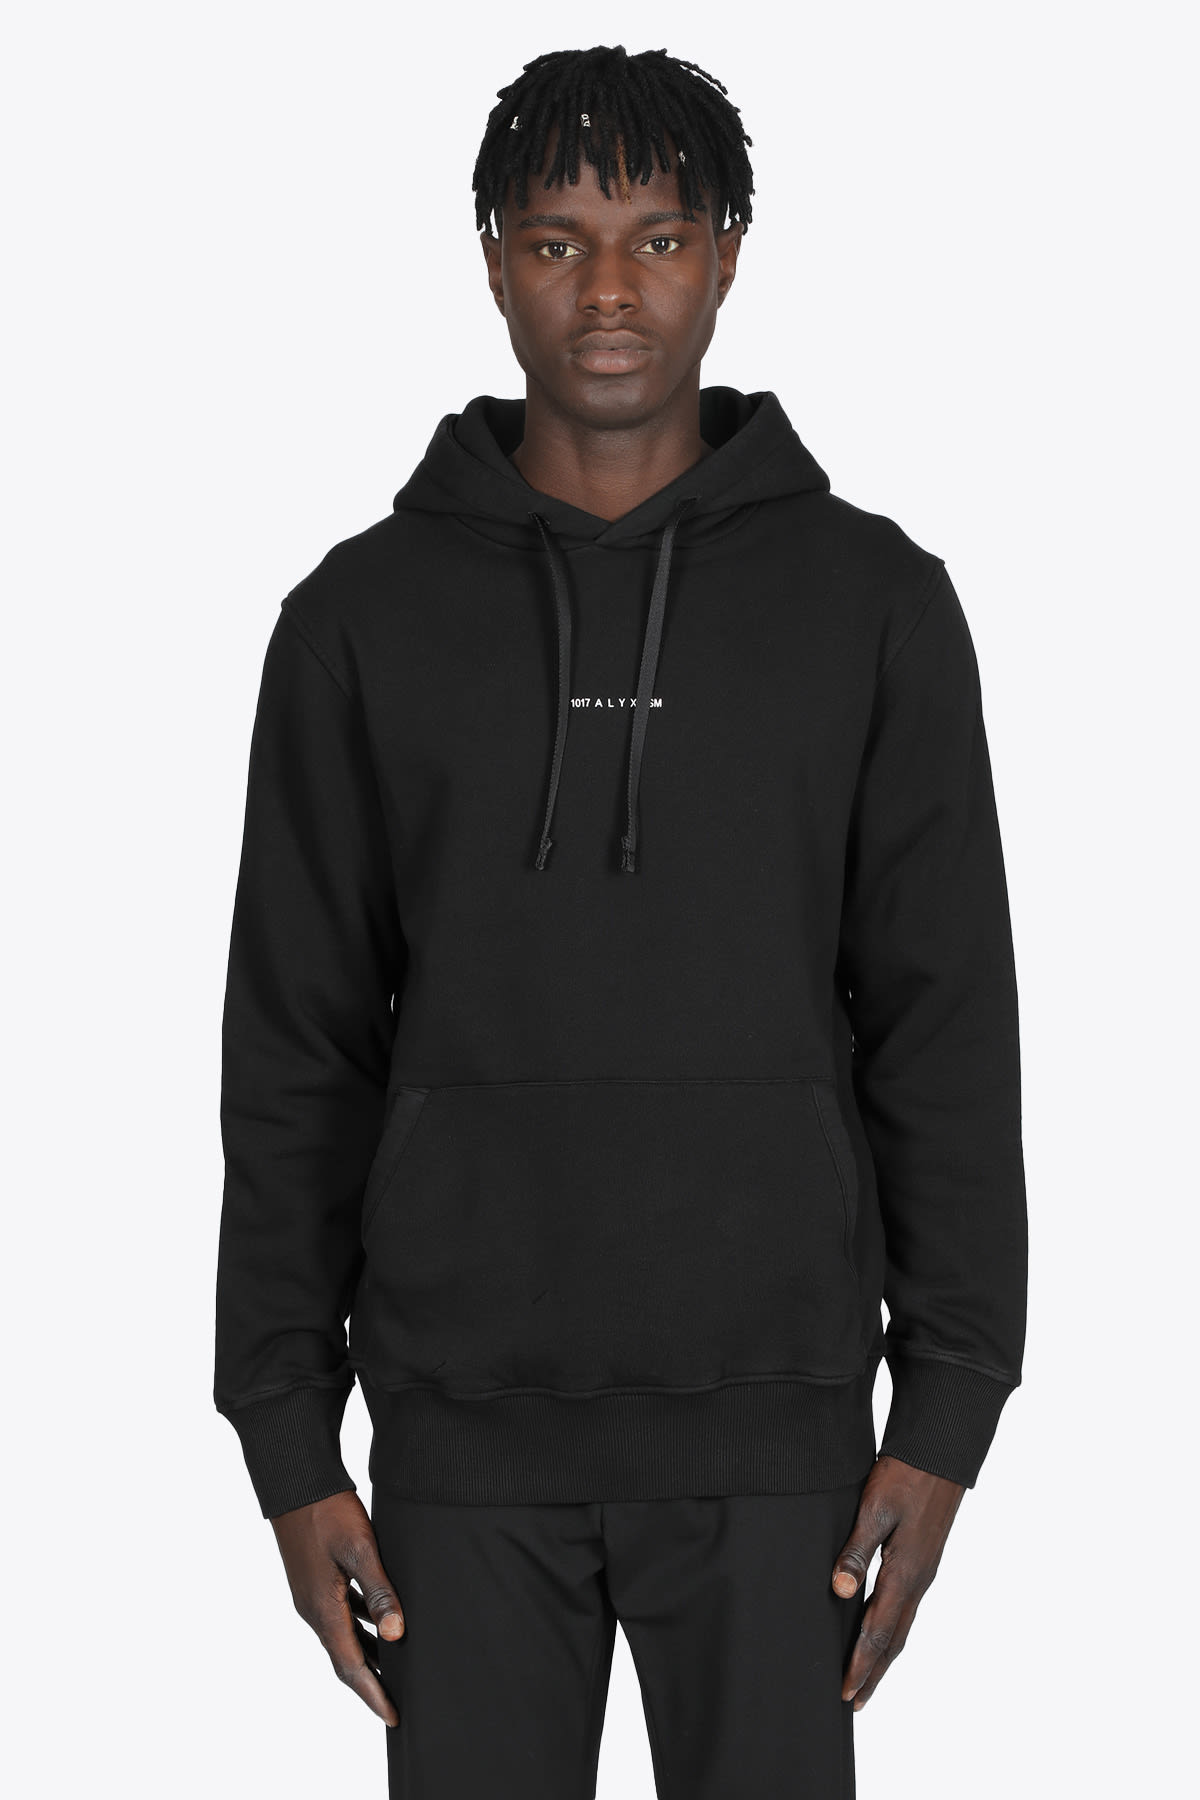 1017 ALYX 9SM Collection Logo Hoodie Black cotton hoodie with collection print